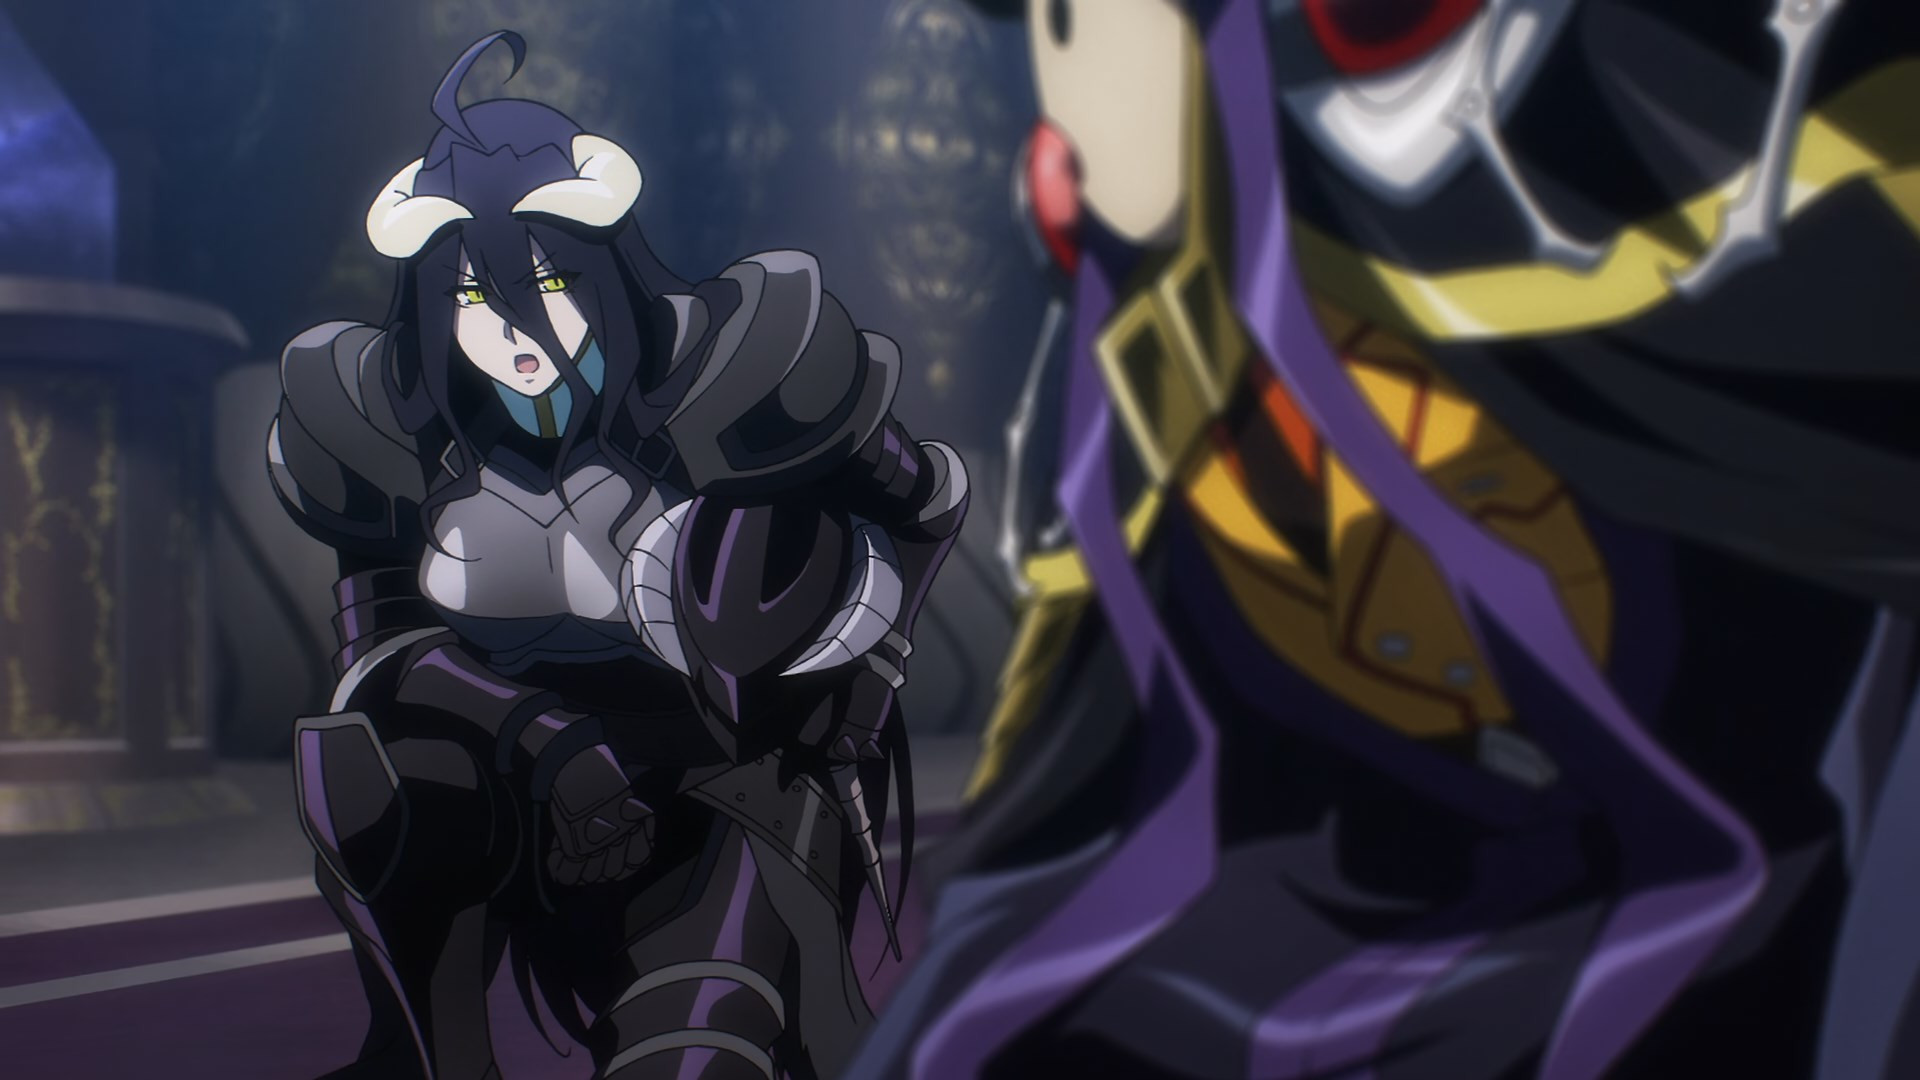 Overlord IV Episode 12 Gets Preview Videos - Anime Corner